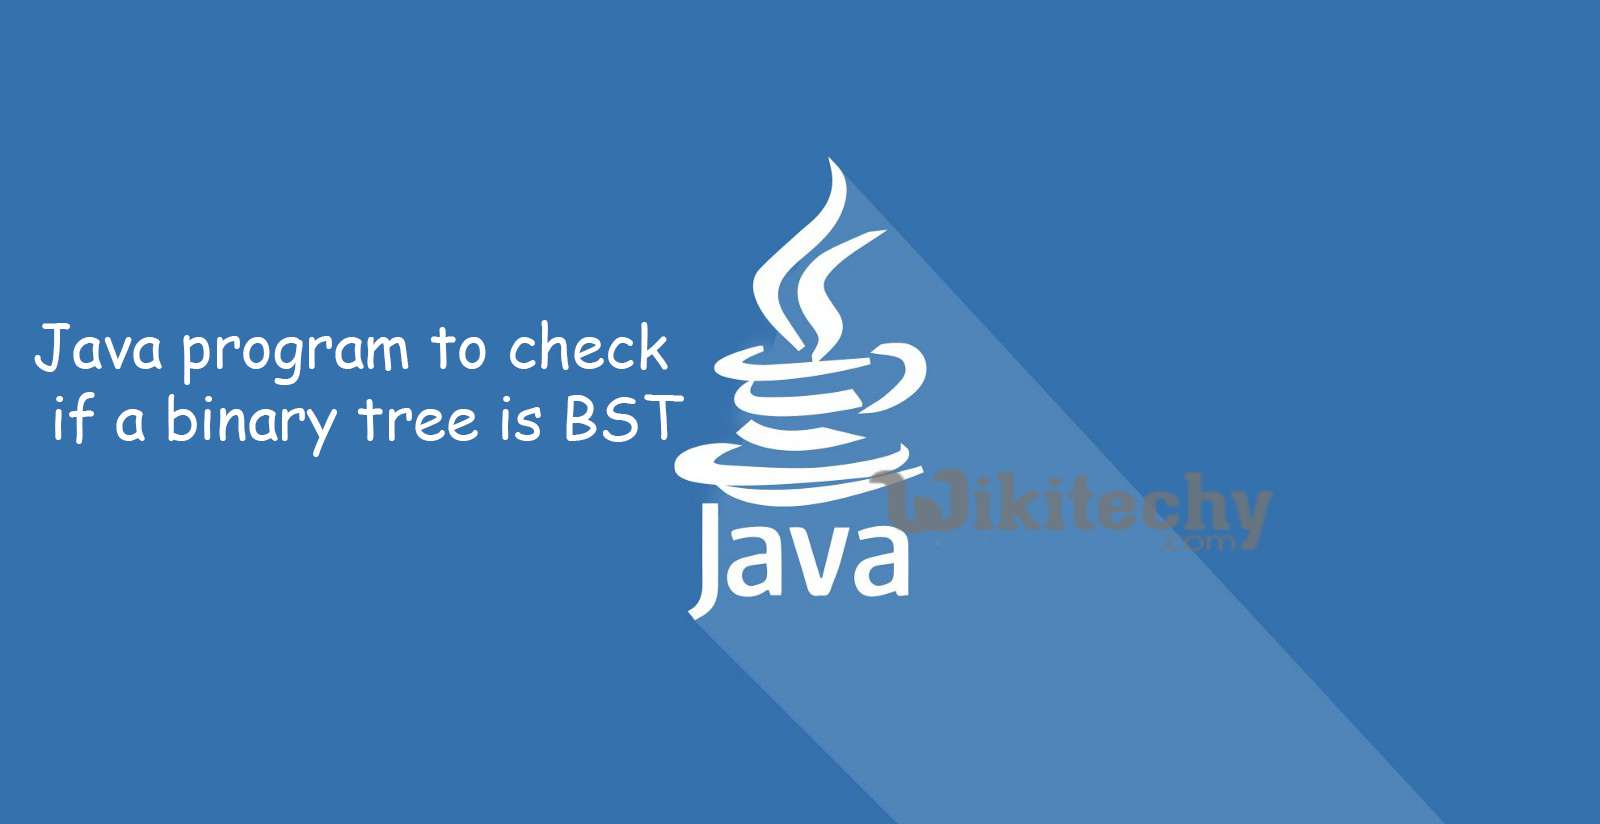 Java program to check if a binary tree is BST